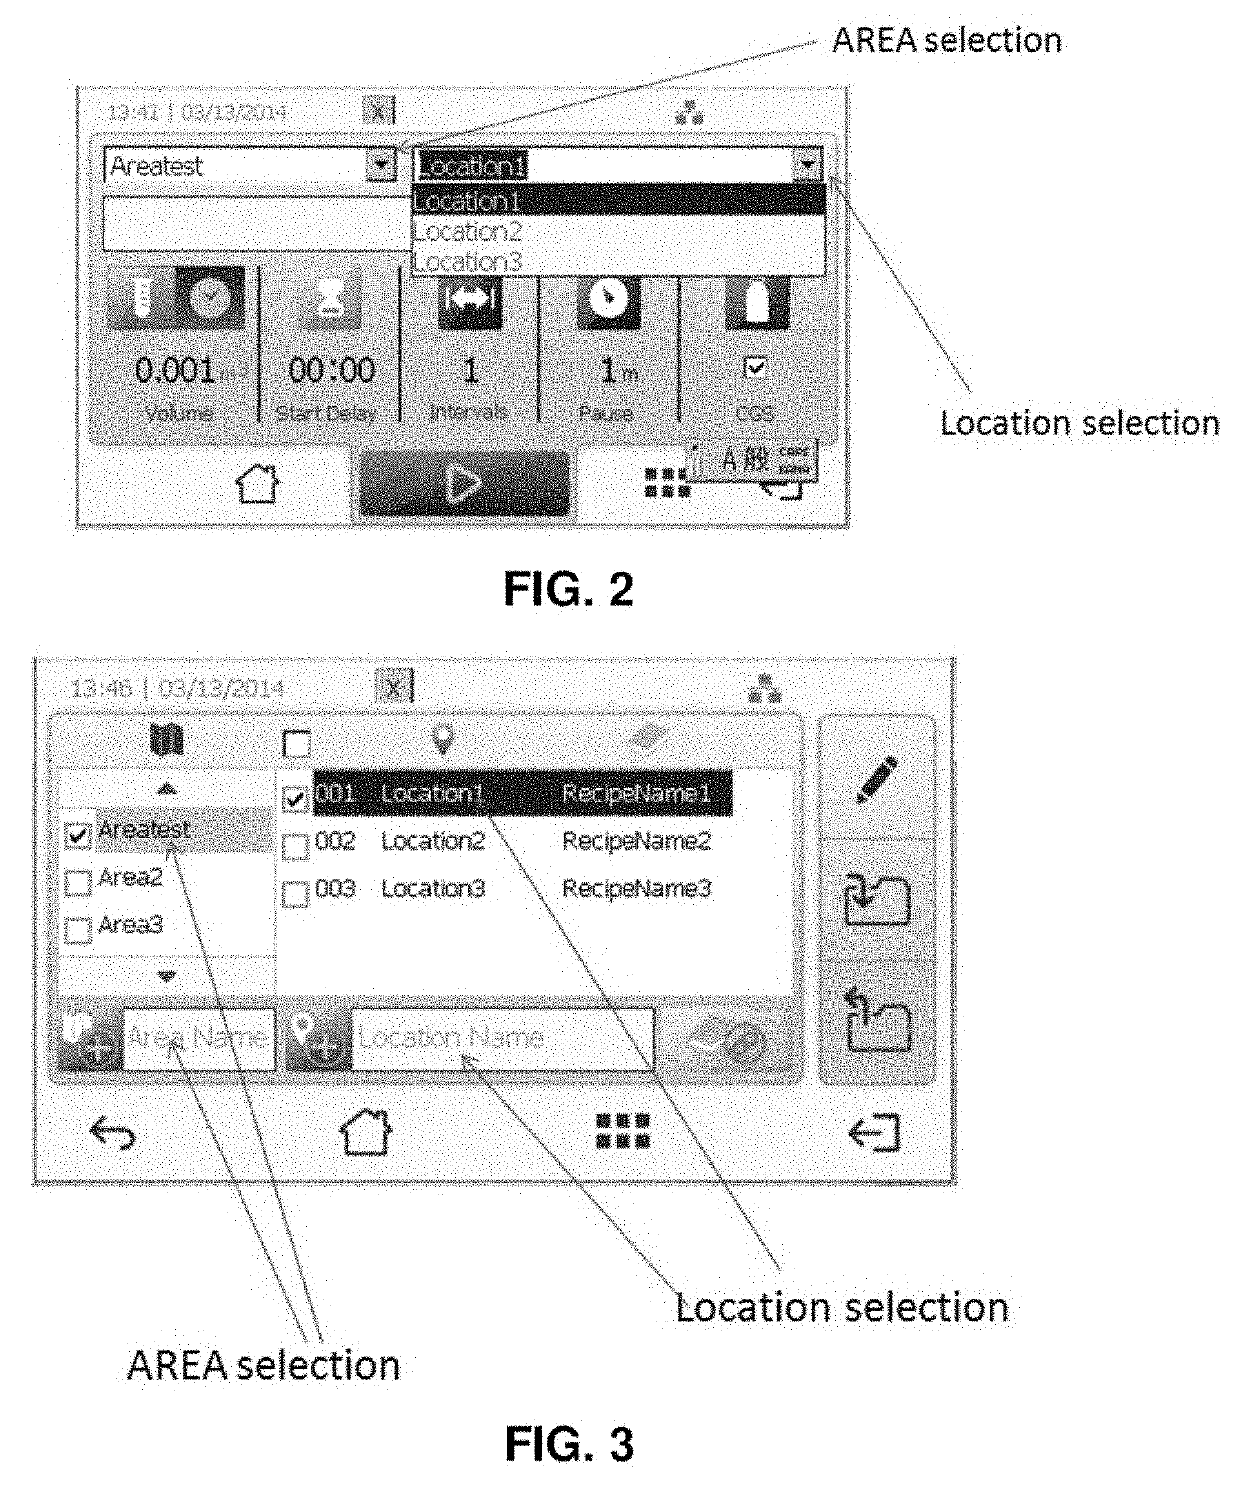 Firmware design for facility navigation, and area and location data management of particle sampling and analysis instruments